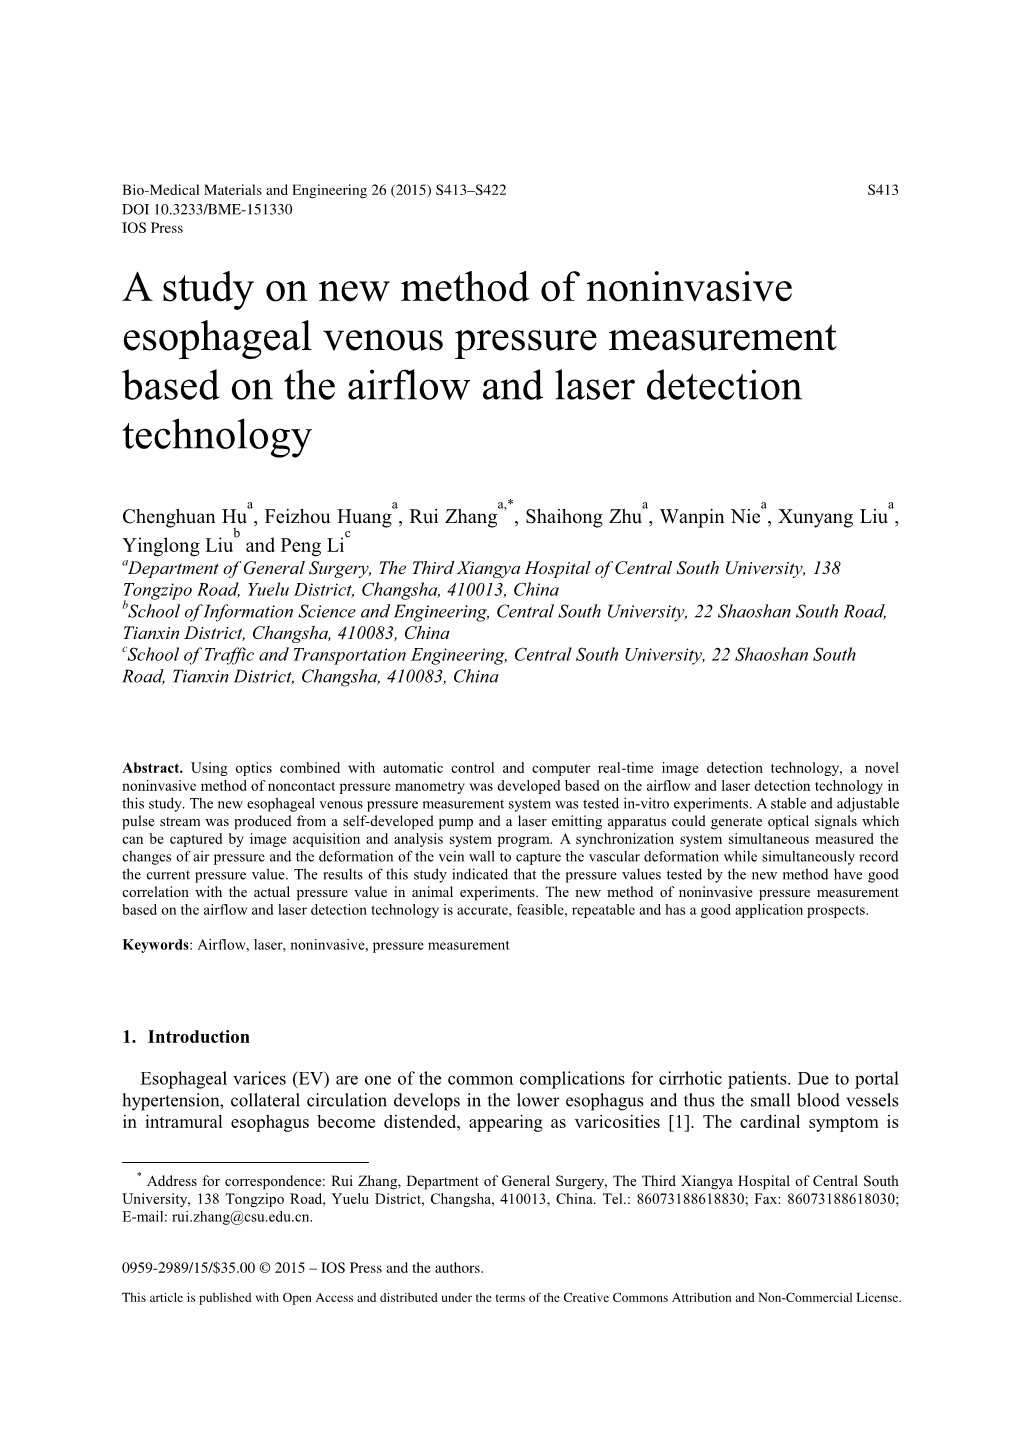 A Study on New Method of Noninvasive Esophageal Venous Pressure Measurement Based on the Airflow and Laser Detection Technology